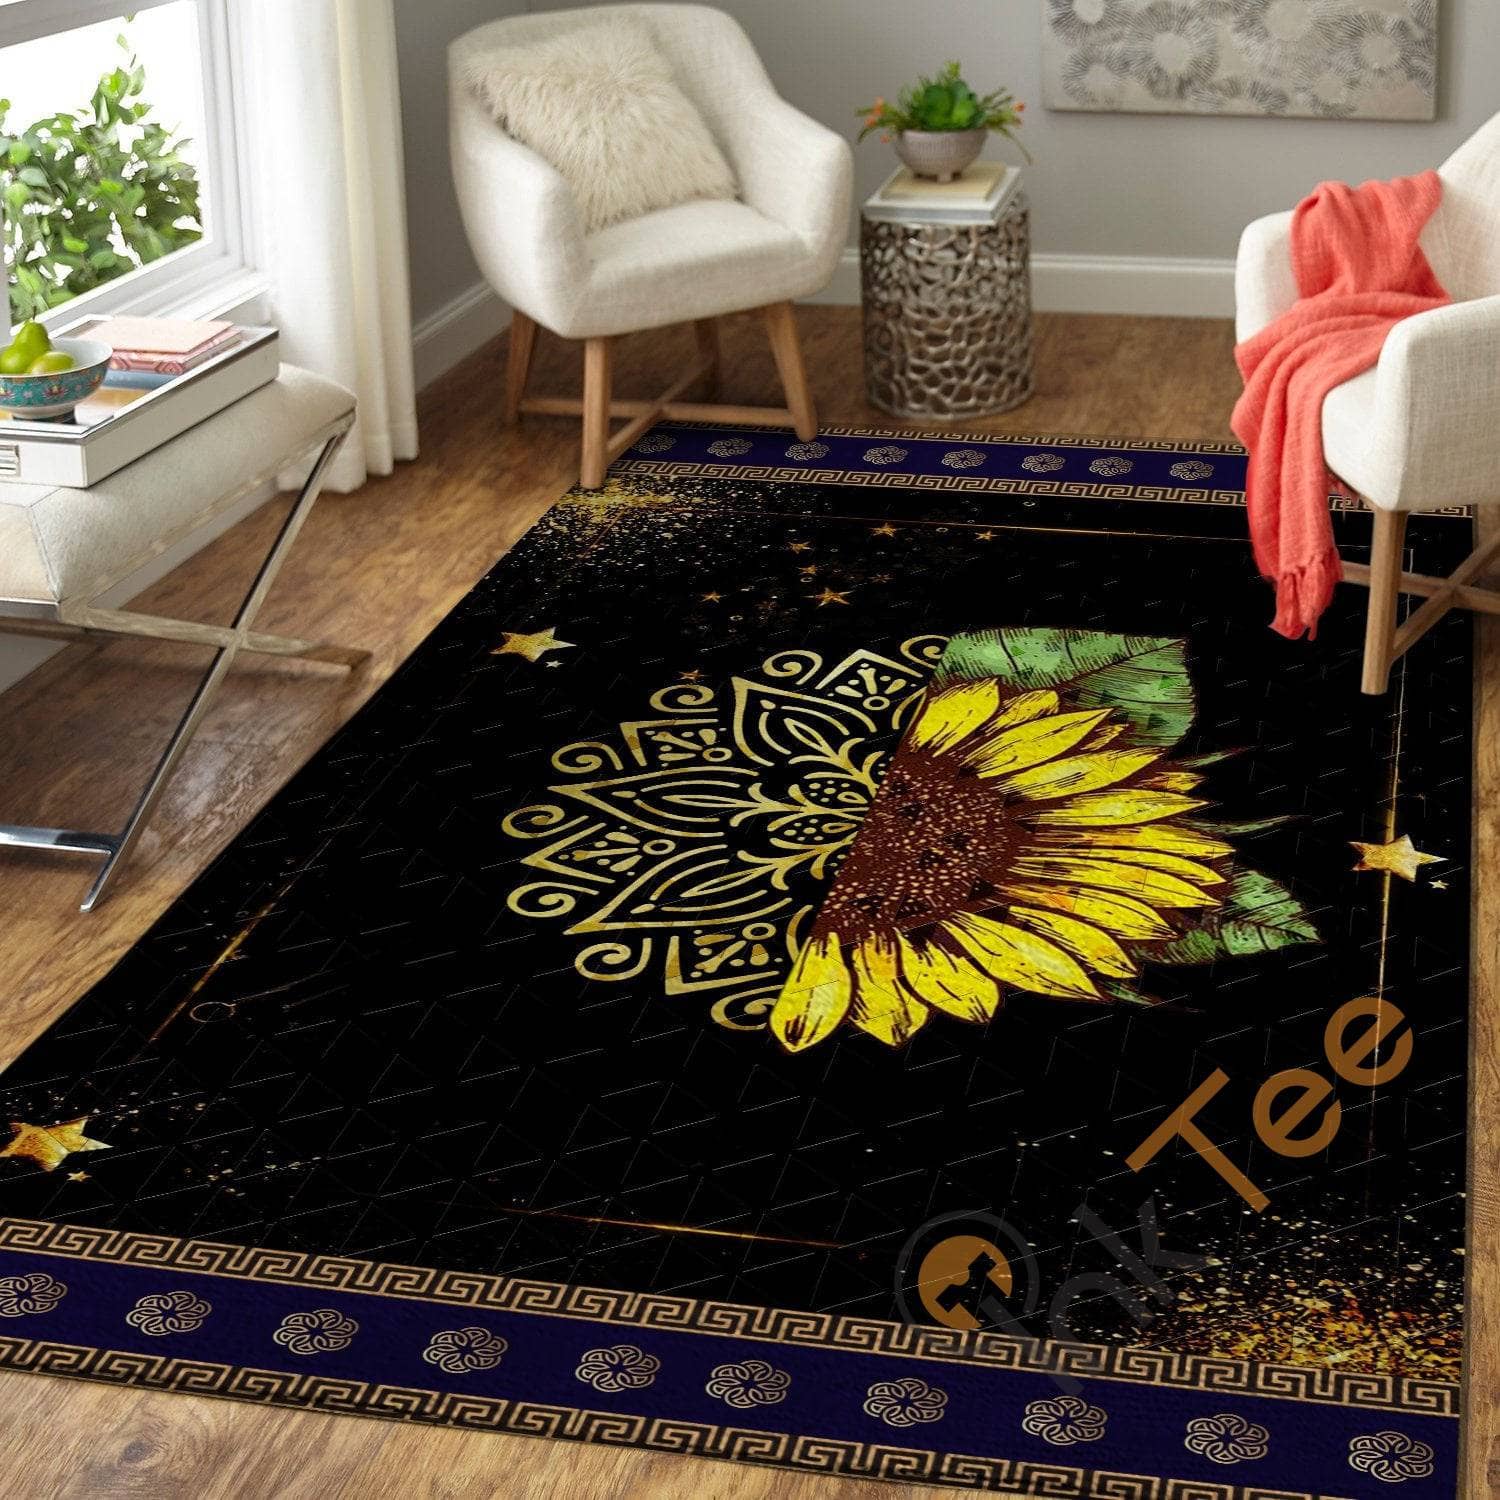 The Combination Of Sunflower And Mandala Pattern Hippie Soft Living Room Carpet Rug